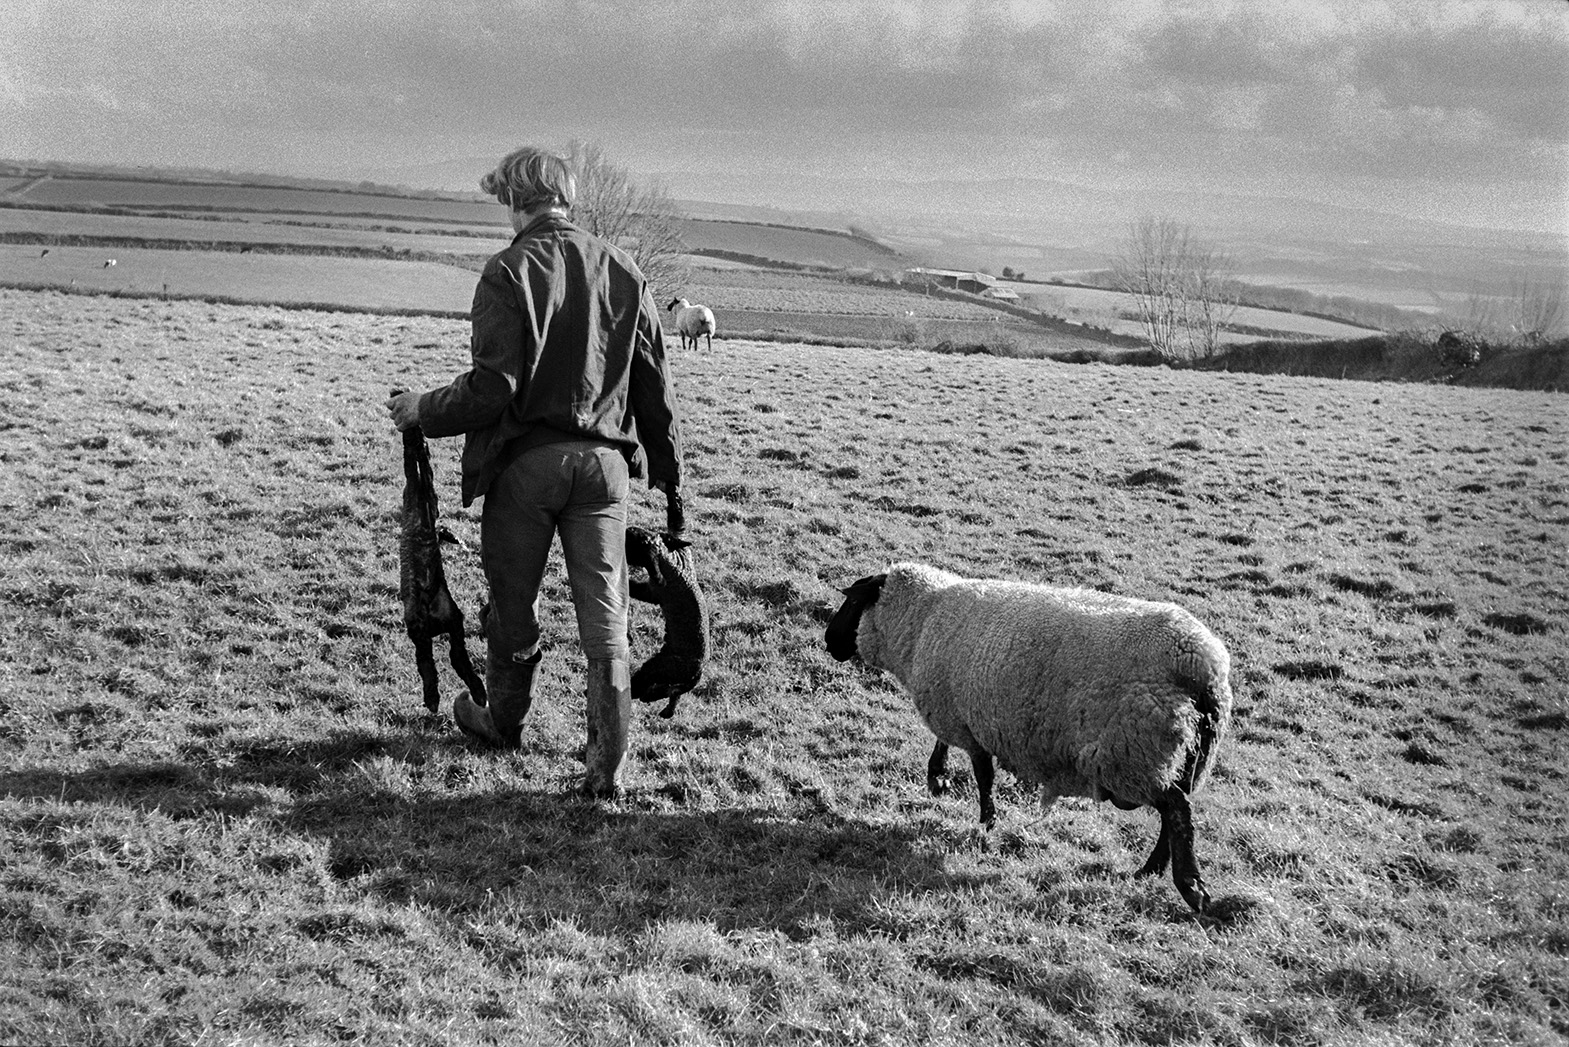 Ivor Bourne carrying two new born lambs by their legs across a field at Mill Road Farm, Beaford with the ewe following behind. A landscape of field and hedgerows can be seen in the background. The farm was also known as Jeffrys.